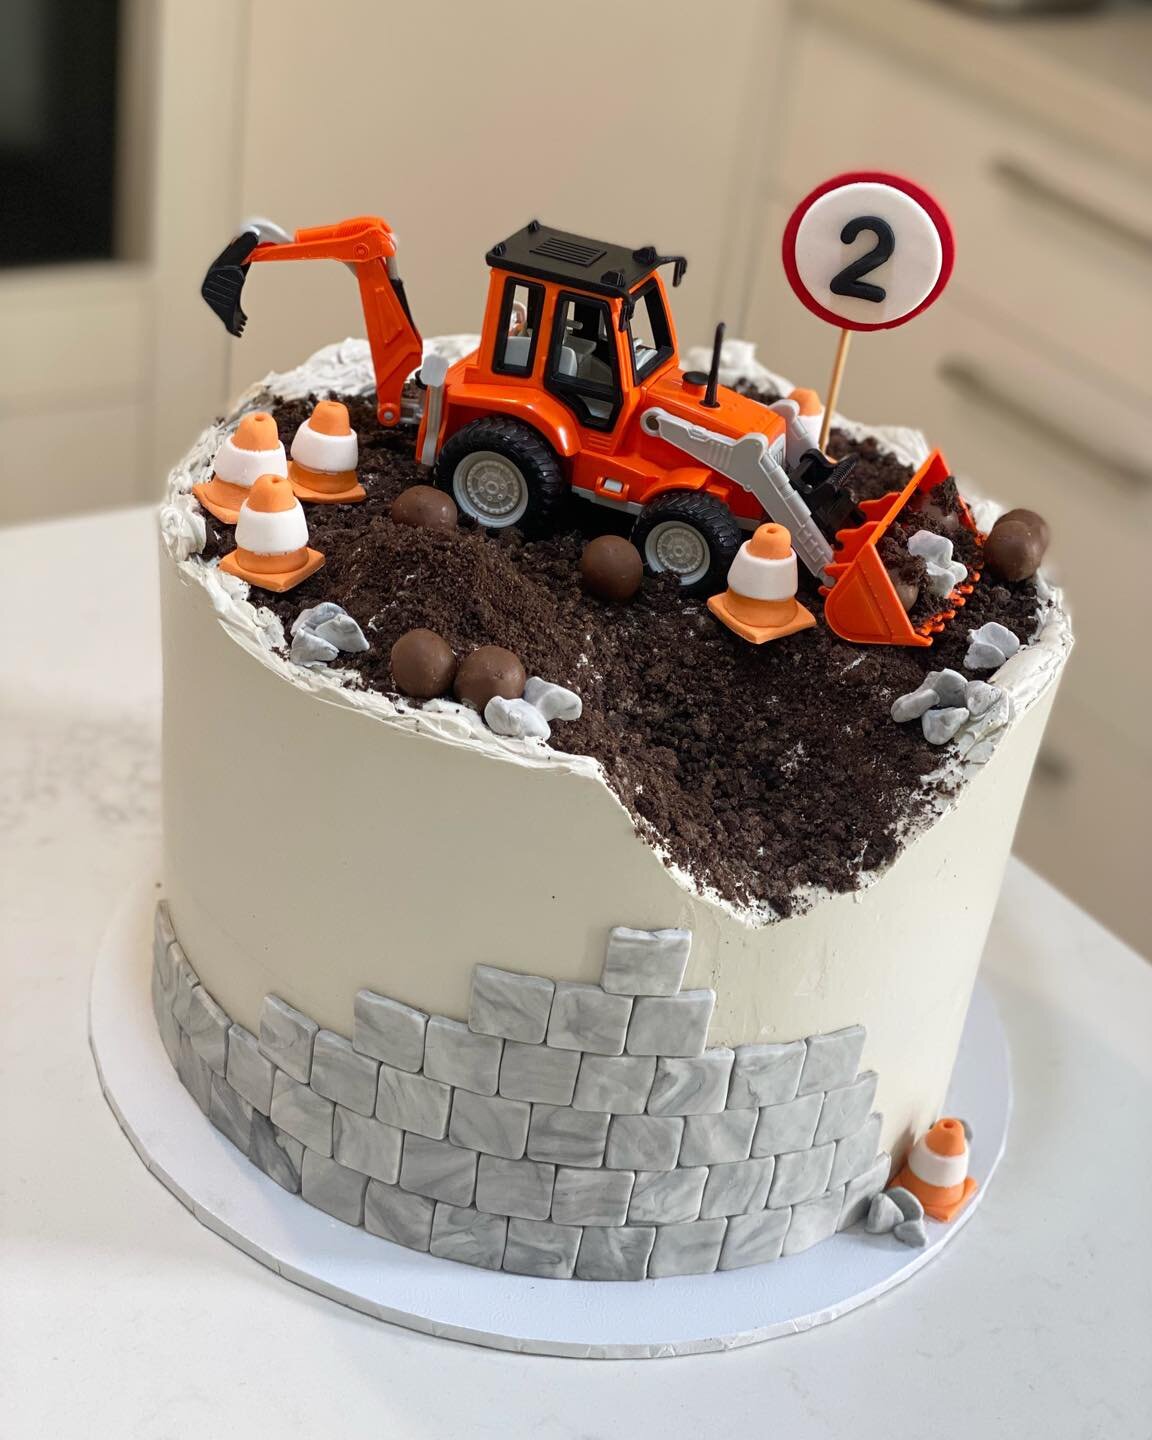 I hope you all DIG this cake as much as I do 😜🚧 the perfect construction cake for those digger obsessed 😍 

#cakesofadelaide #adelaidecakes #constructioncake #diggercake #diggercakeadelaide #adelaideweddingcakes #weddingcakesadelaide